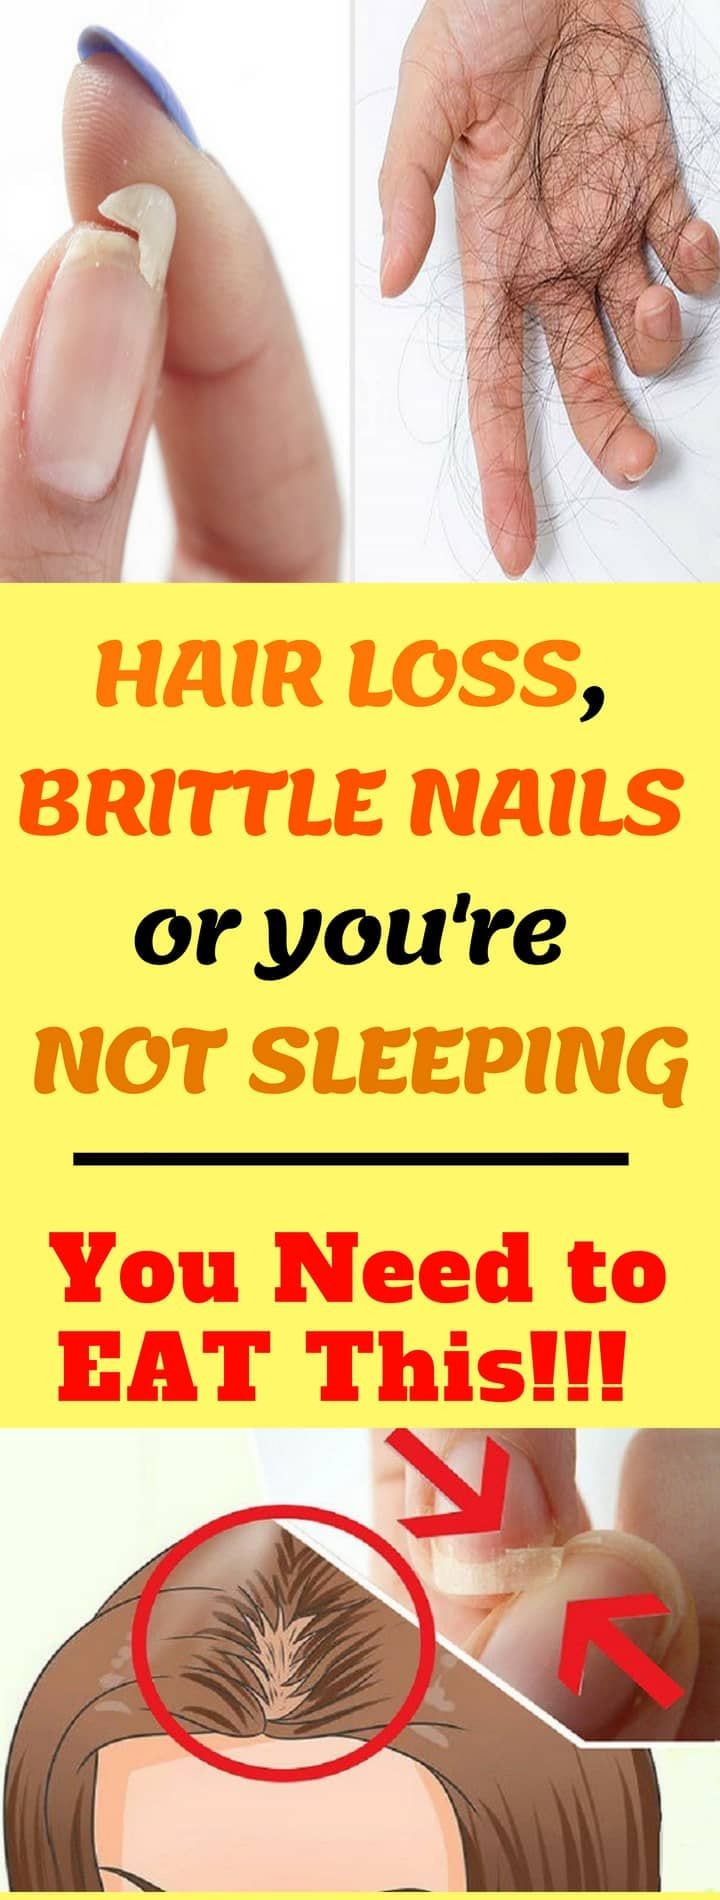 [ad_1]

EAT THIS IF YOU HAVE HAIR LOSS, BRITTLE NAILS OR YOU’RE NOT SLEEPING!!! #hairloss #brittle #nails #eat #sleeping #health
Source by mantisforce1
[ad_2]
			
			…